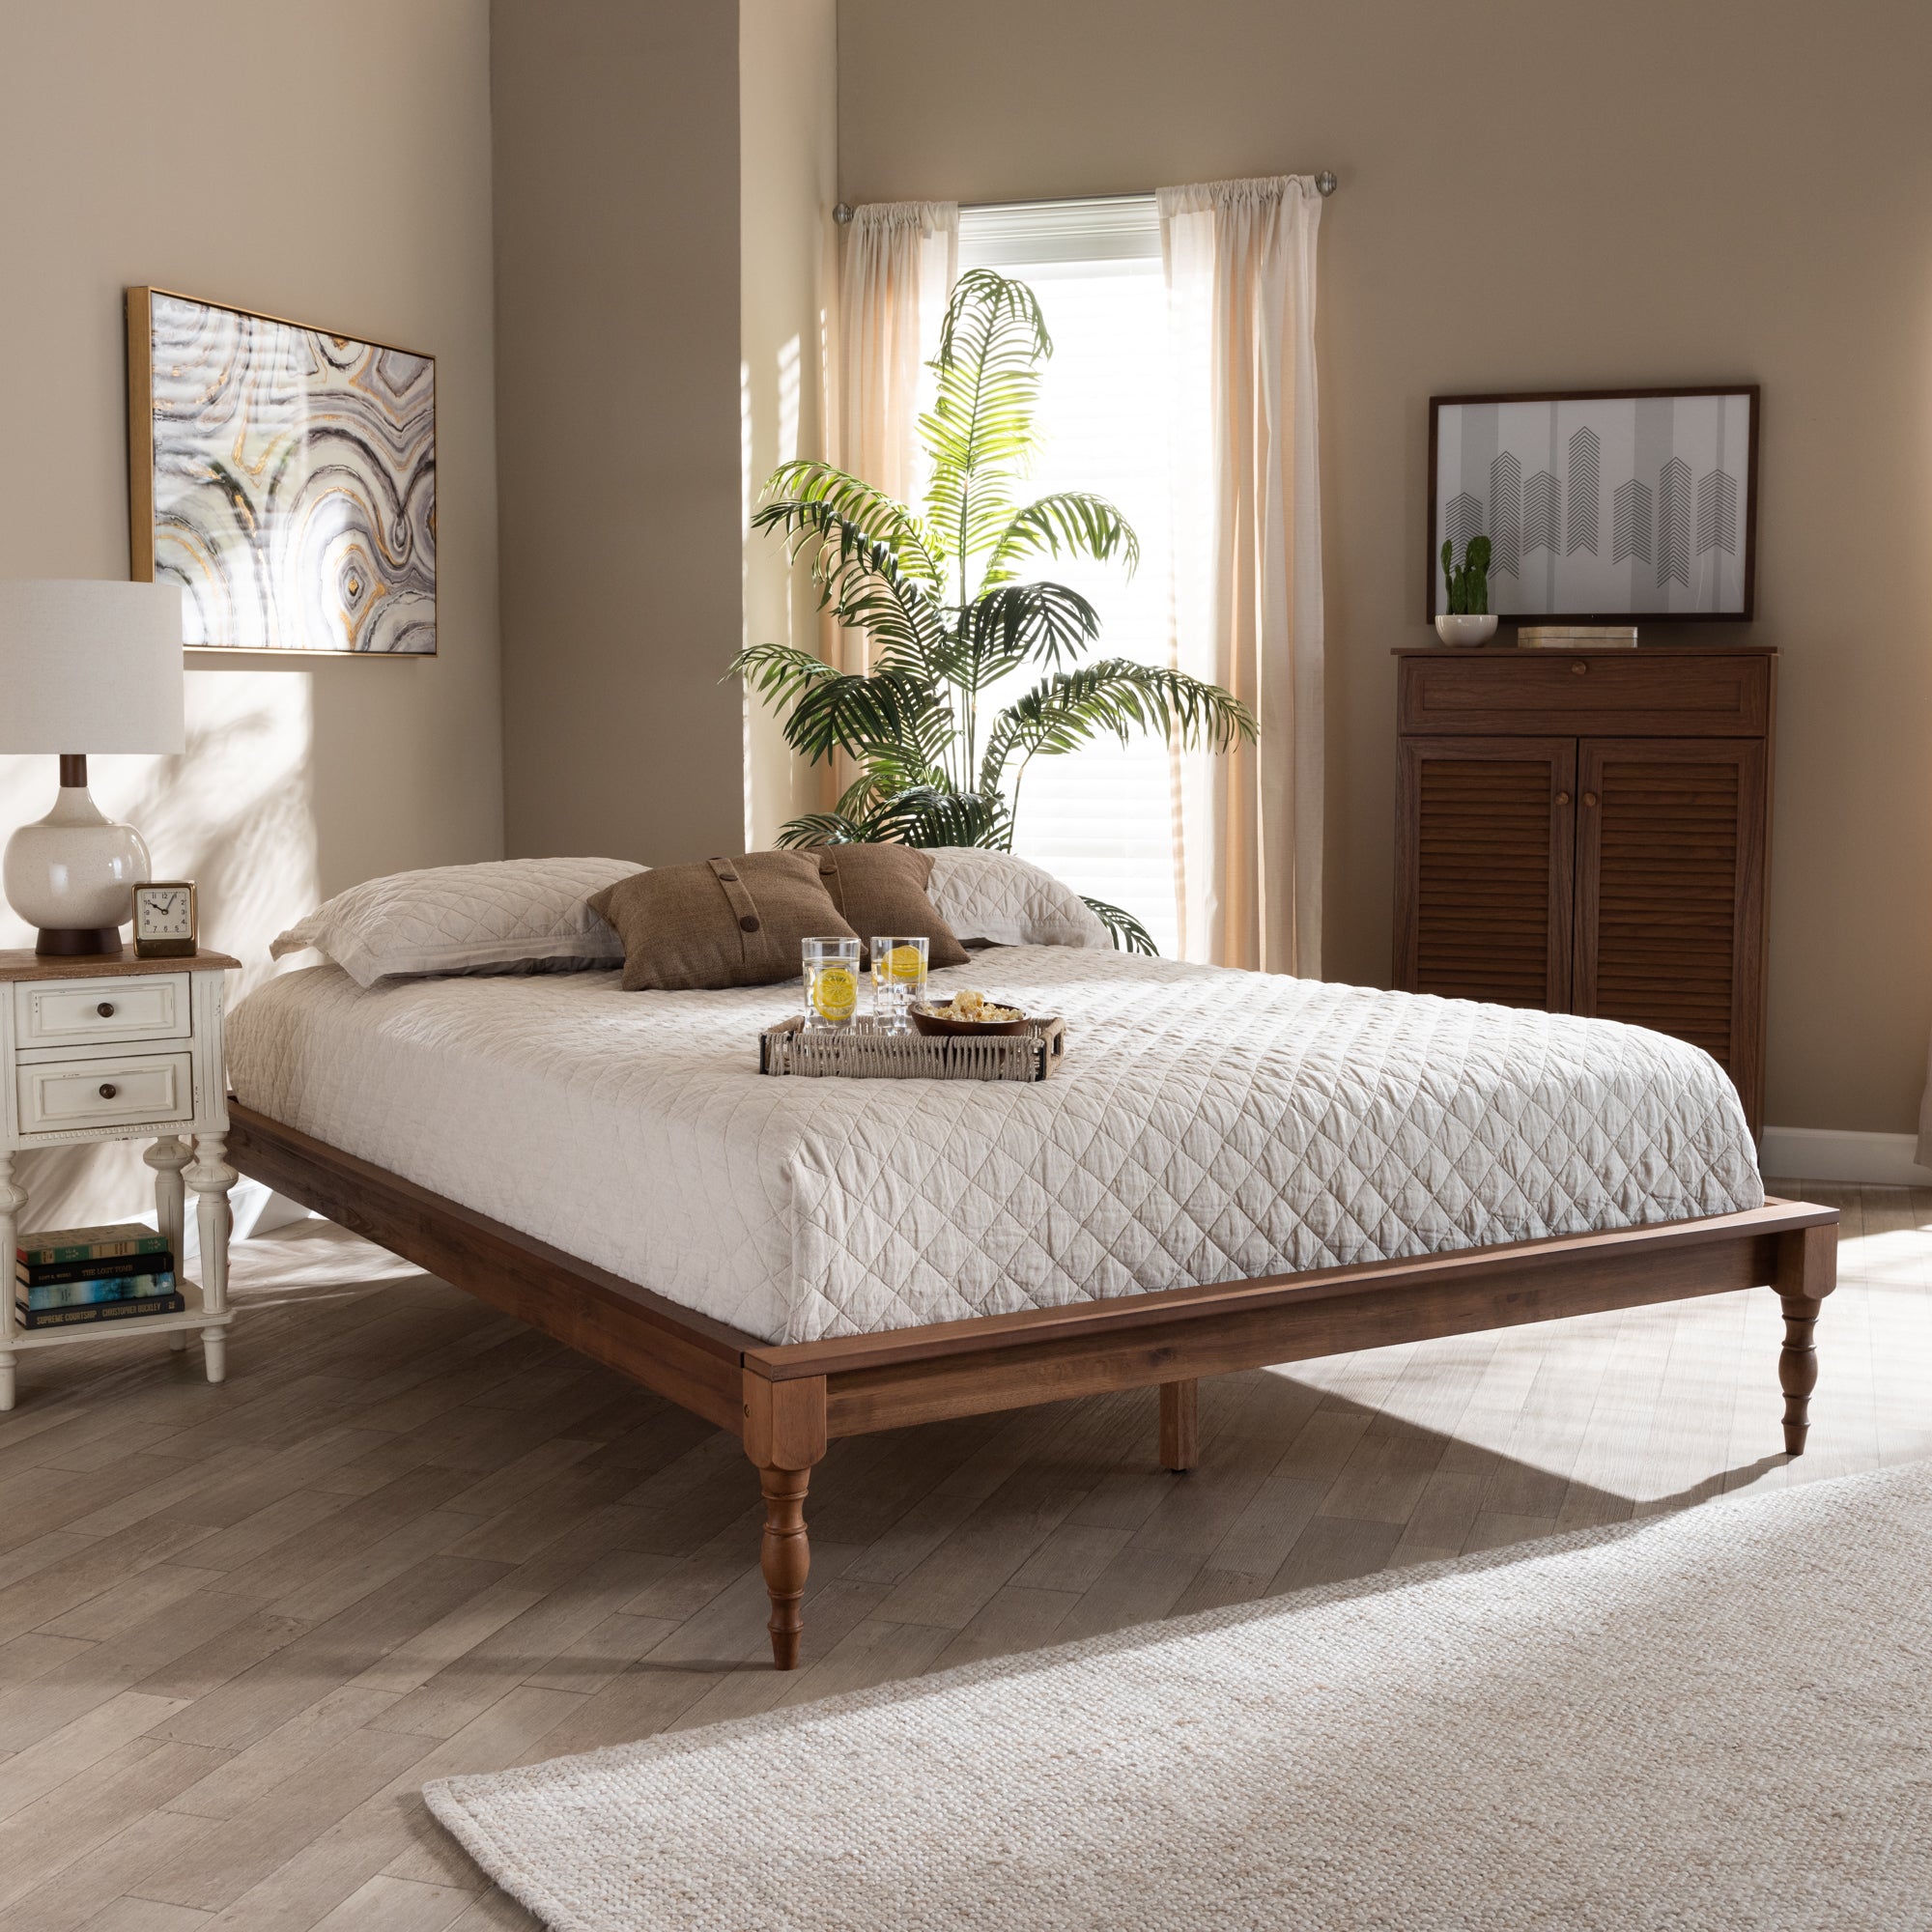 Romy French Provincial Bed Frame-Bed Frame-Baxton Studio - WI-Wall2Wall Furnishings